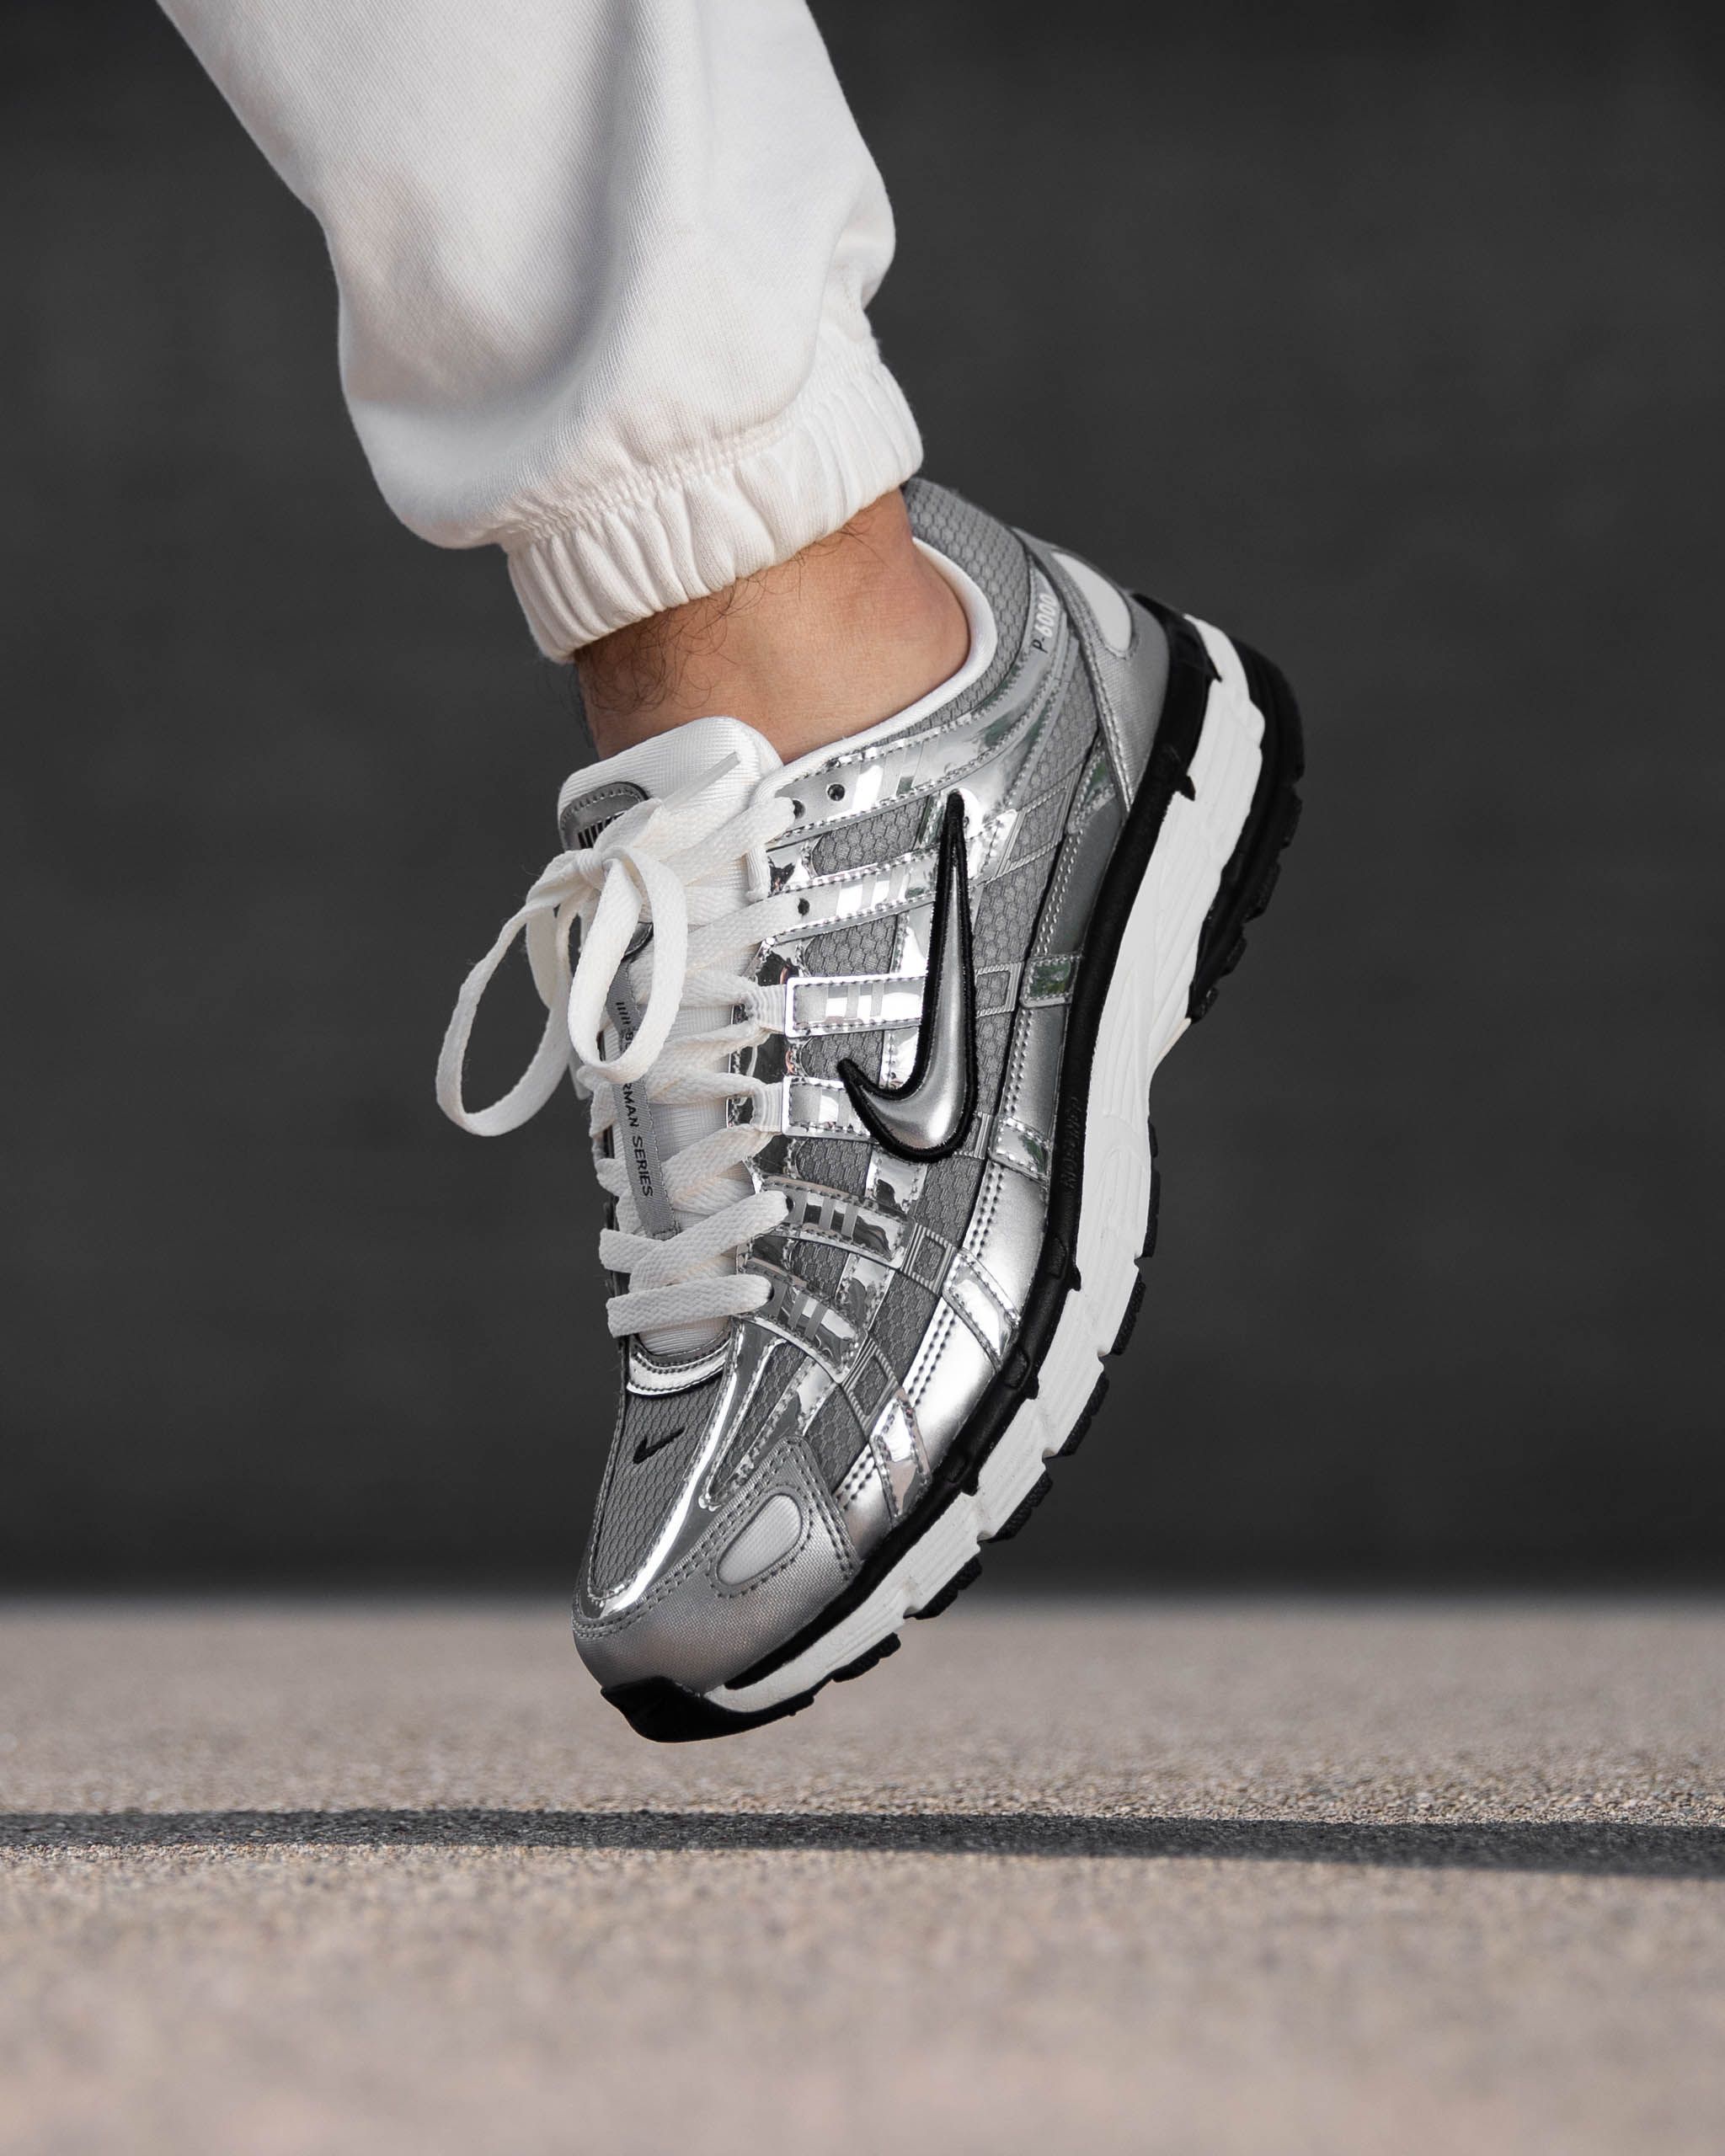 Titolo on X: "silver P-6000 by Nike check it out ➡️ https://t.co/H3DOgFtdsj US 7 (40) - US (46) style code 🔎 CN0149-001 #nike #nikesportswear #p6000 #silver #nikep6000 #titolo #titolostyle / X